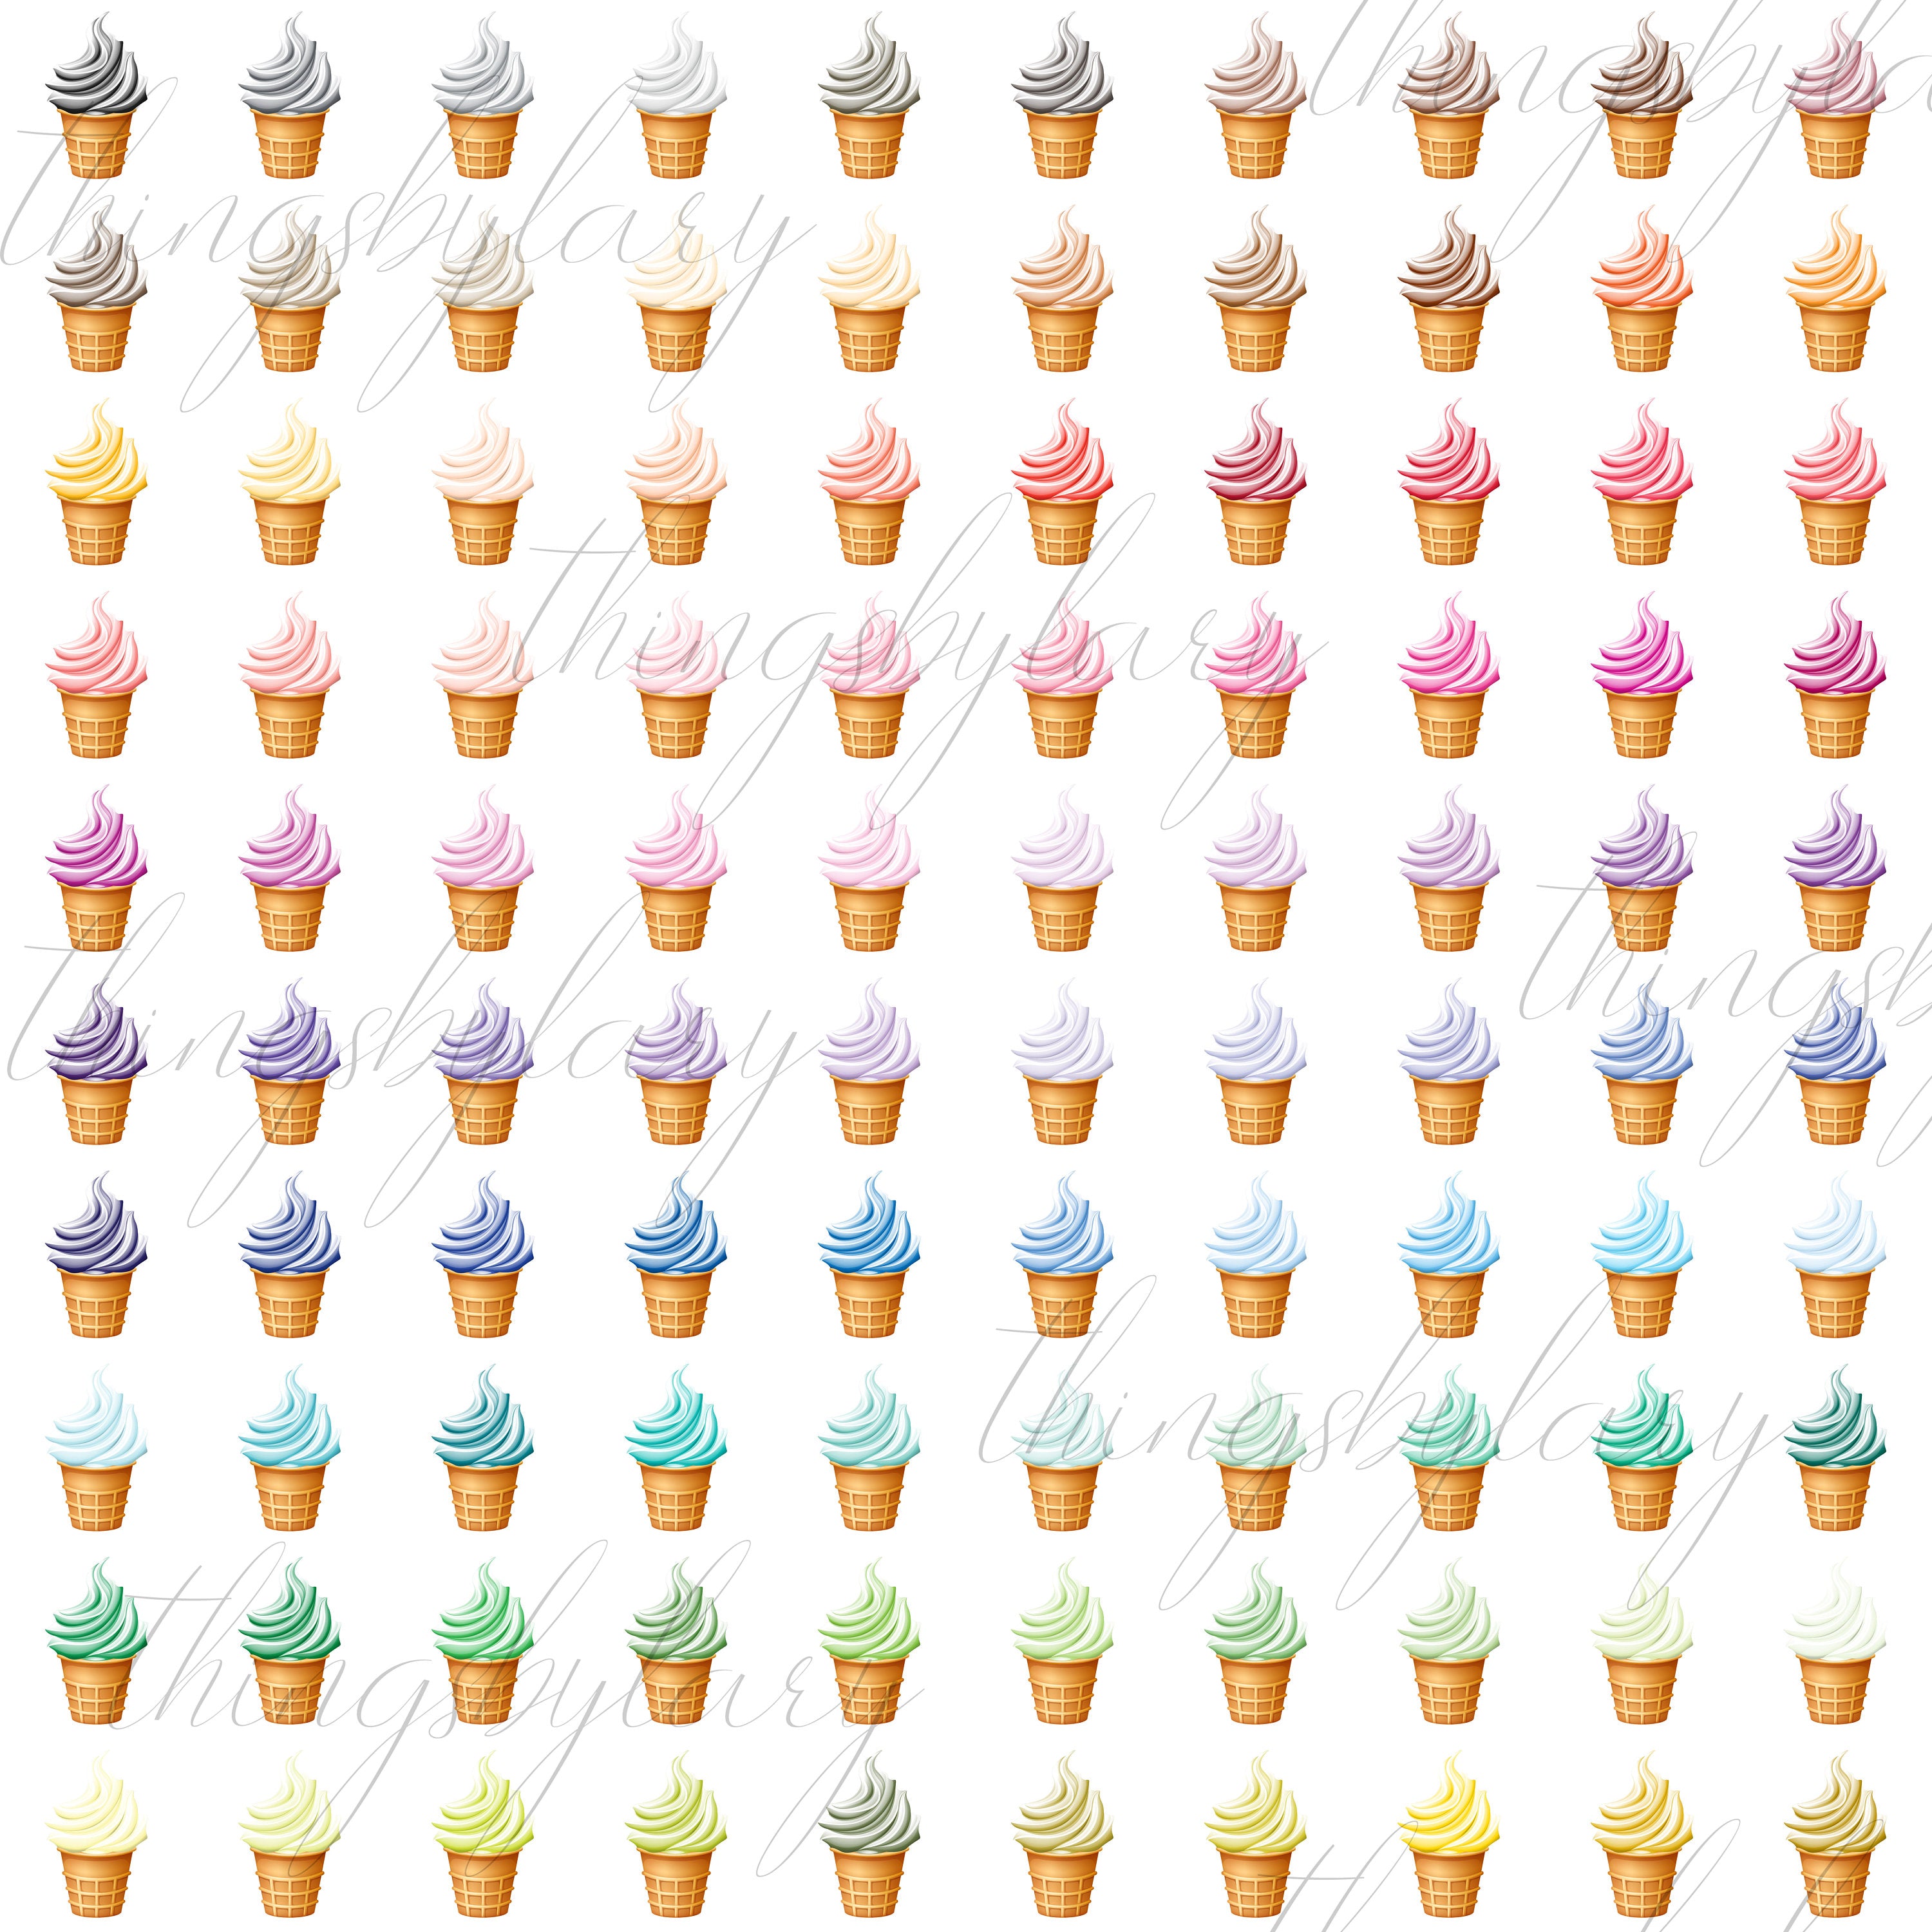 100 Ice Cream Cliparts, Printable, Commercial Use, Planner Clipart, Digital Ice cream, Kid Clipart, Birthday Party, Digital Birthday Supply